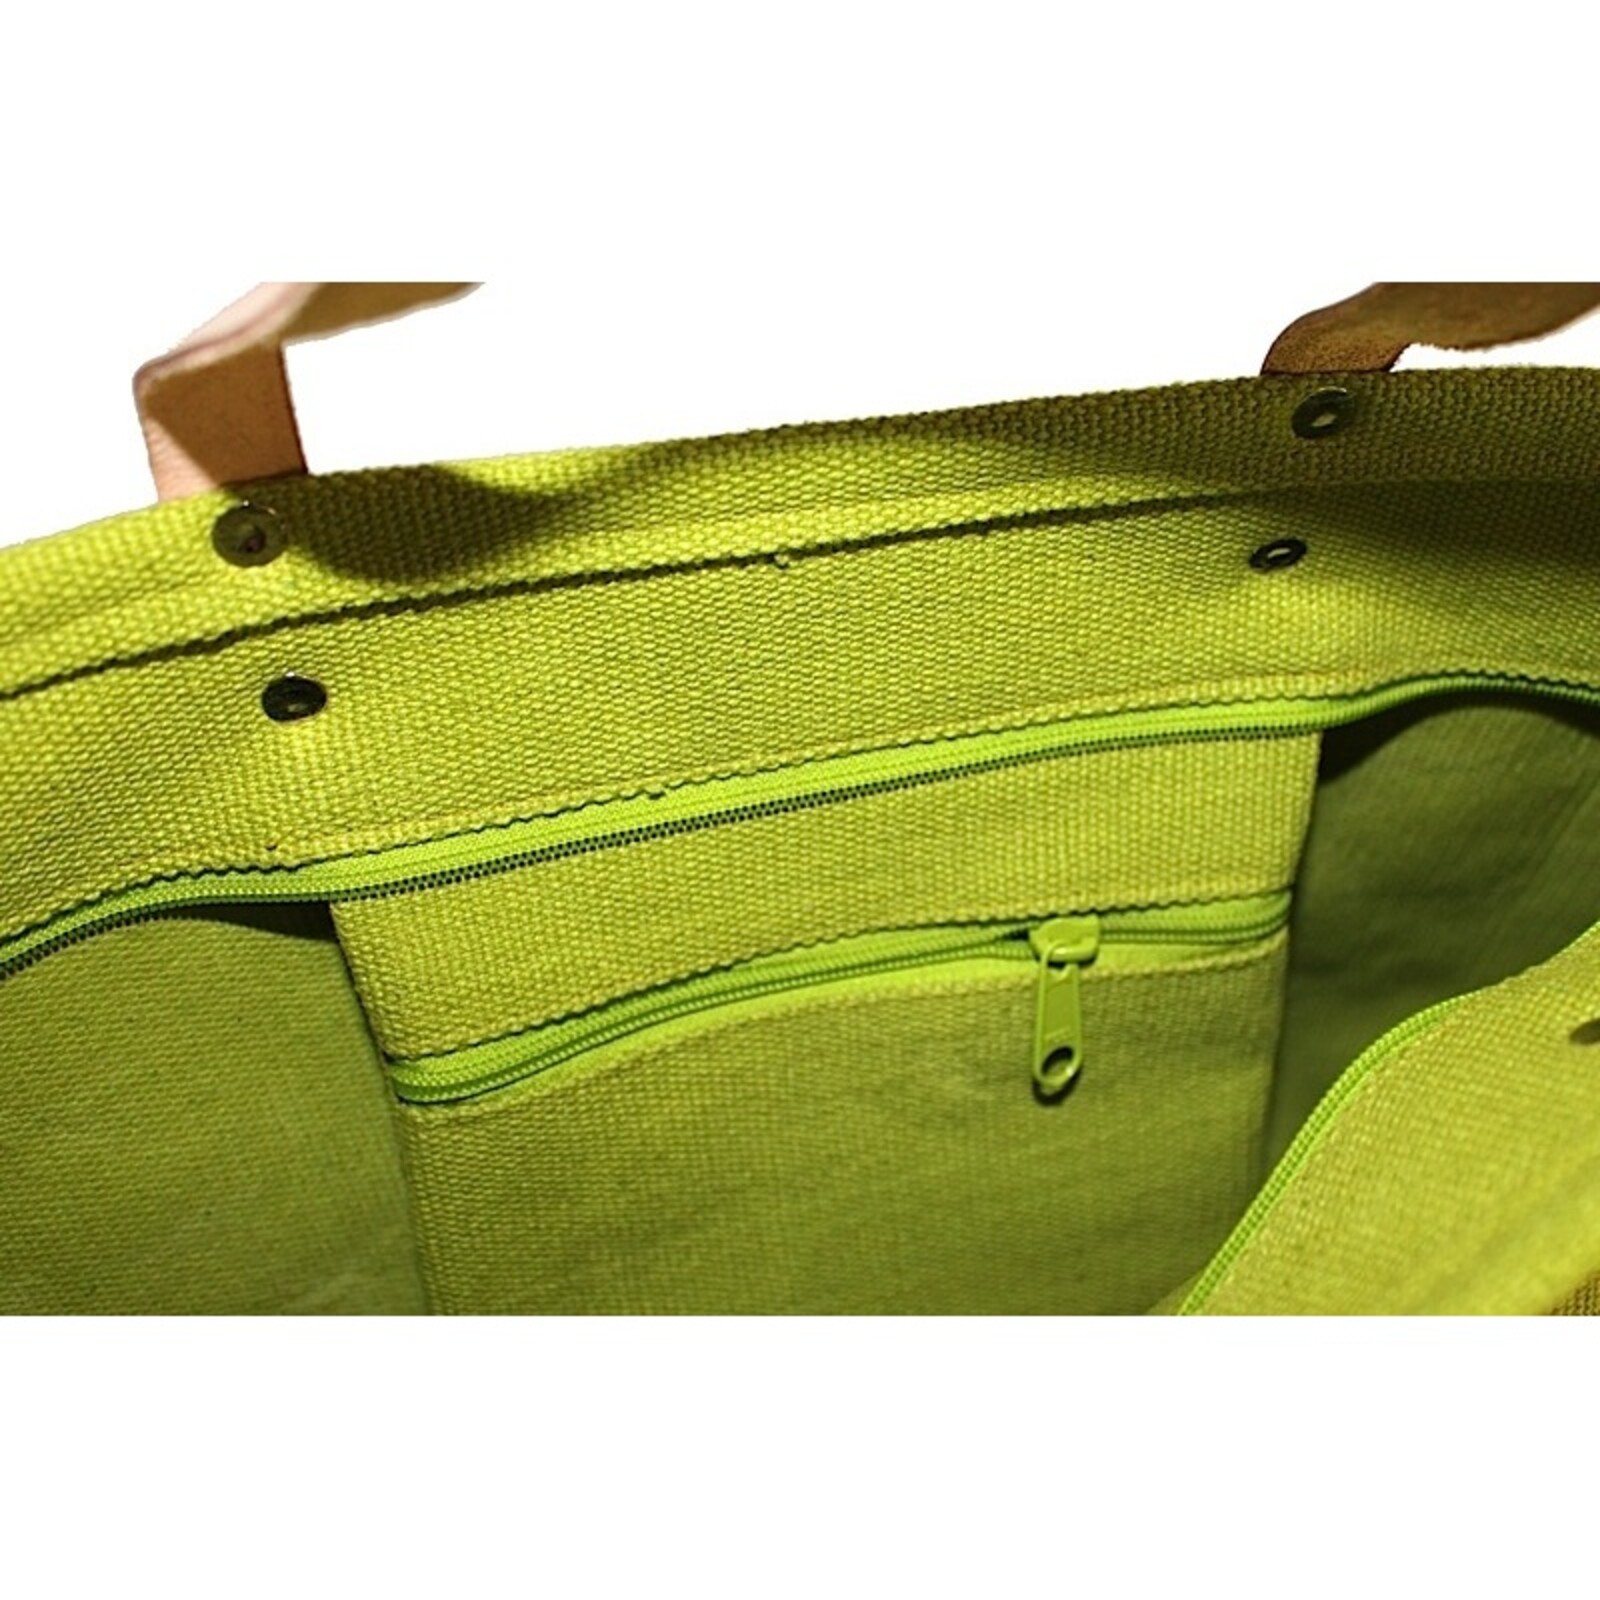 Olive Bag with Leather Handles